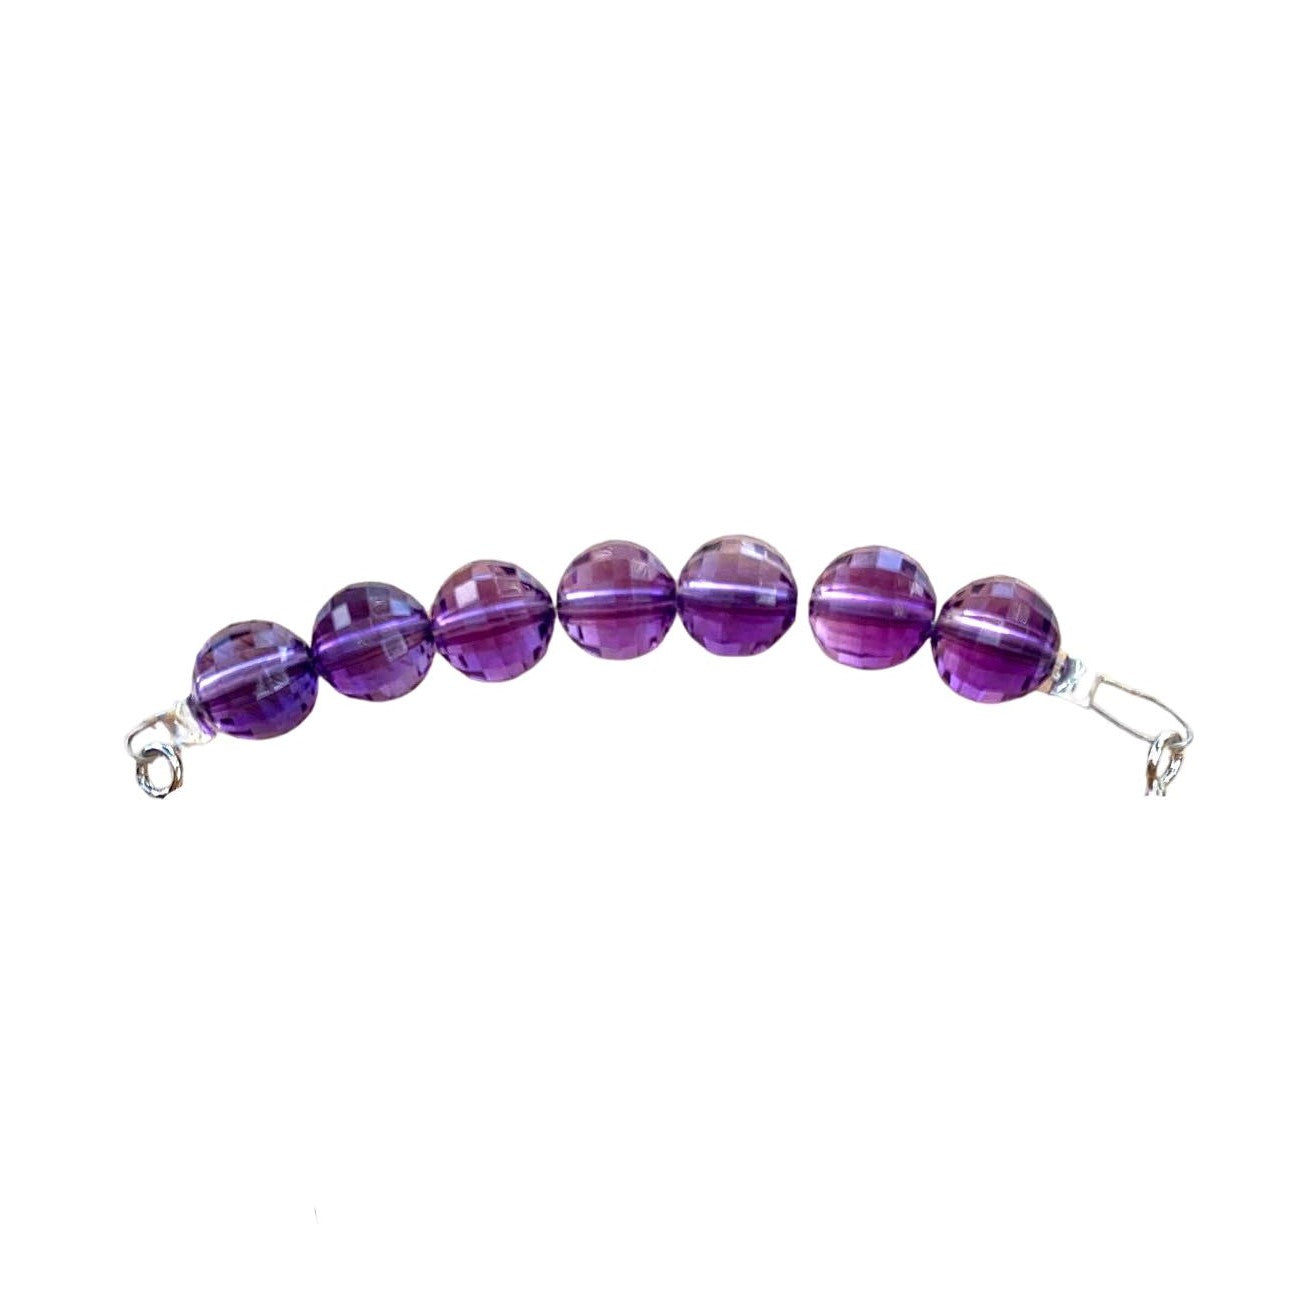 healing crystal bracelets 6mm faceted round sapphire beads